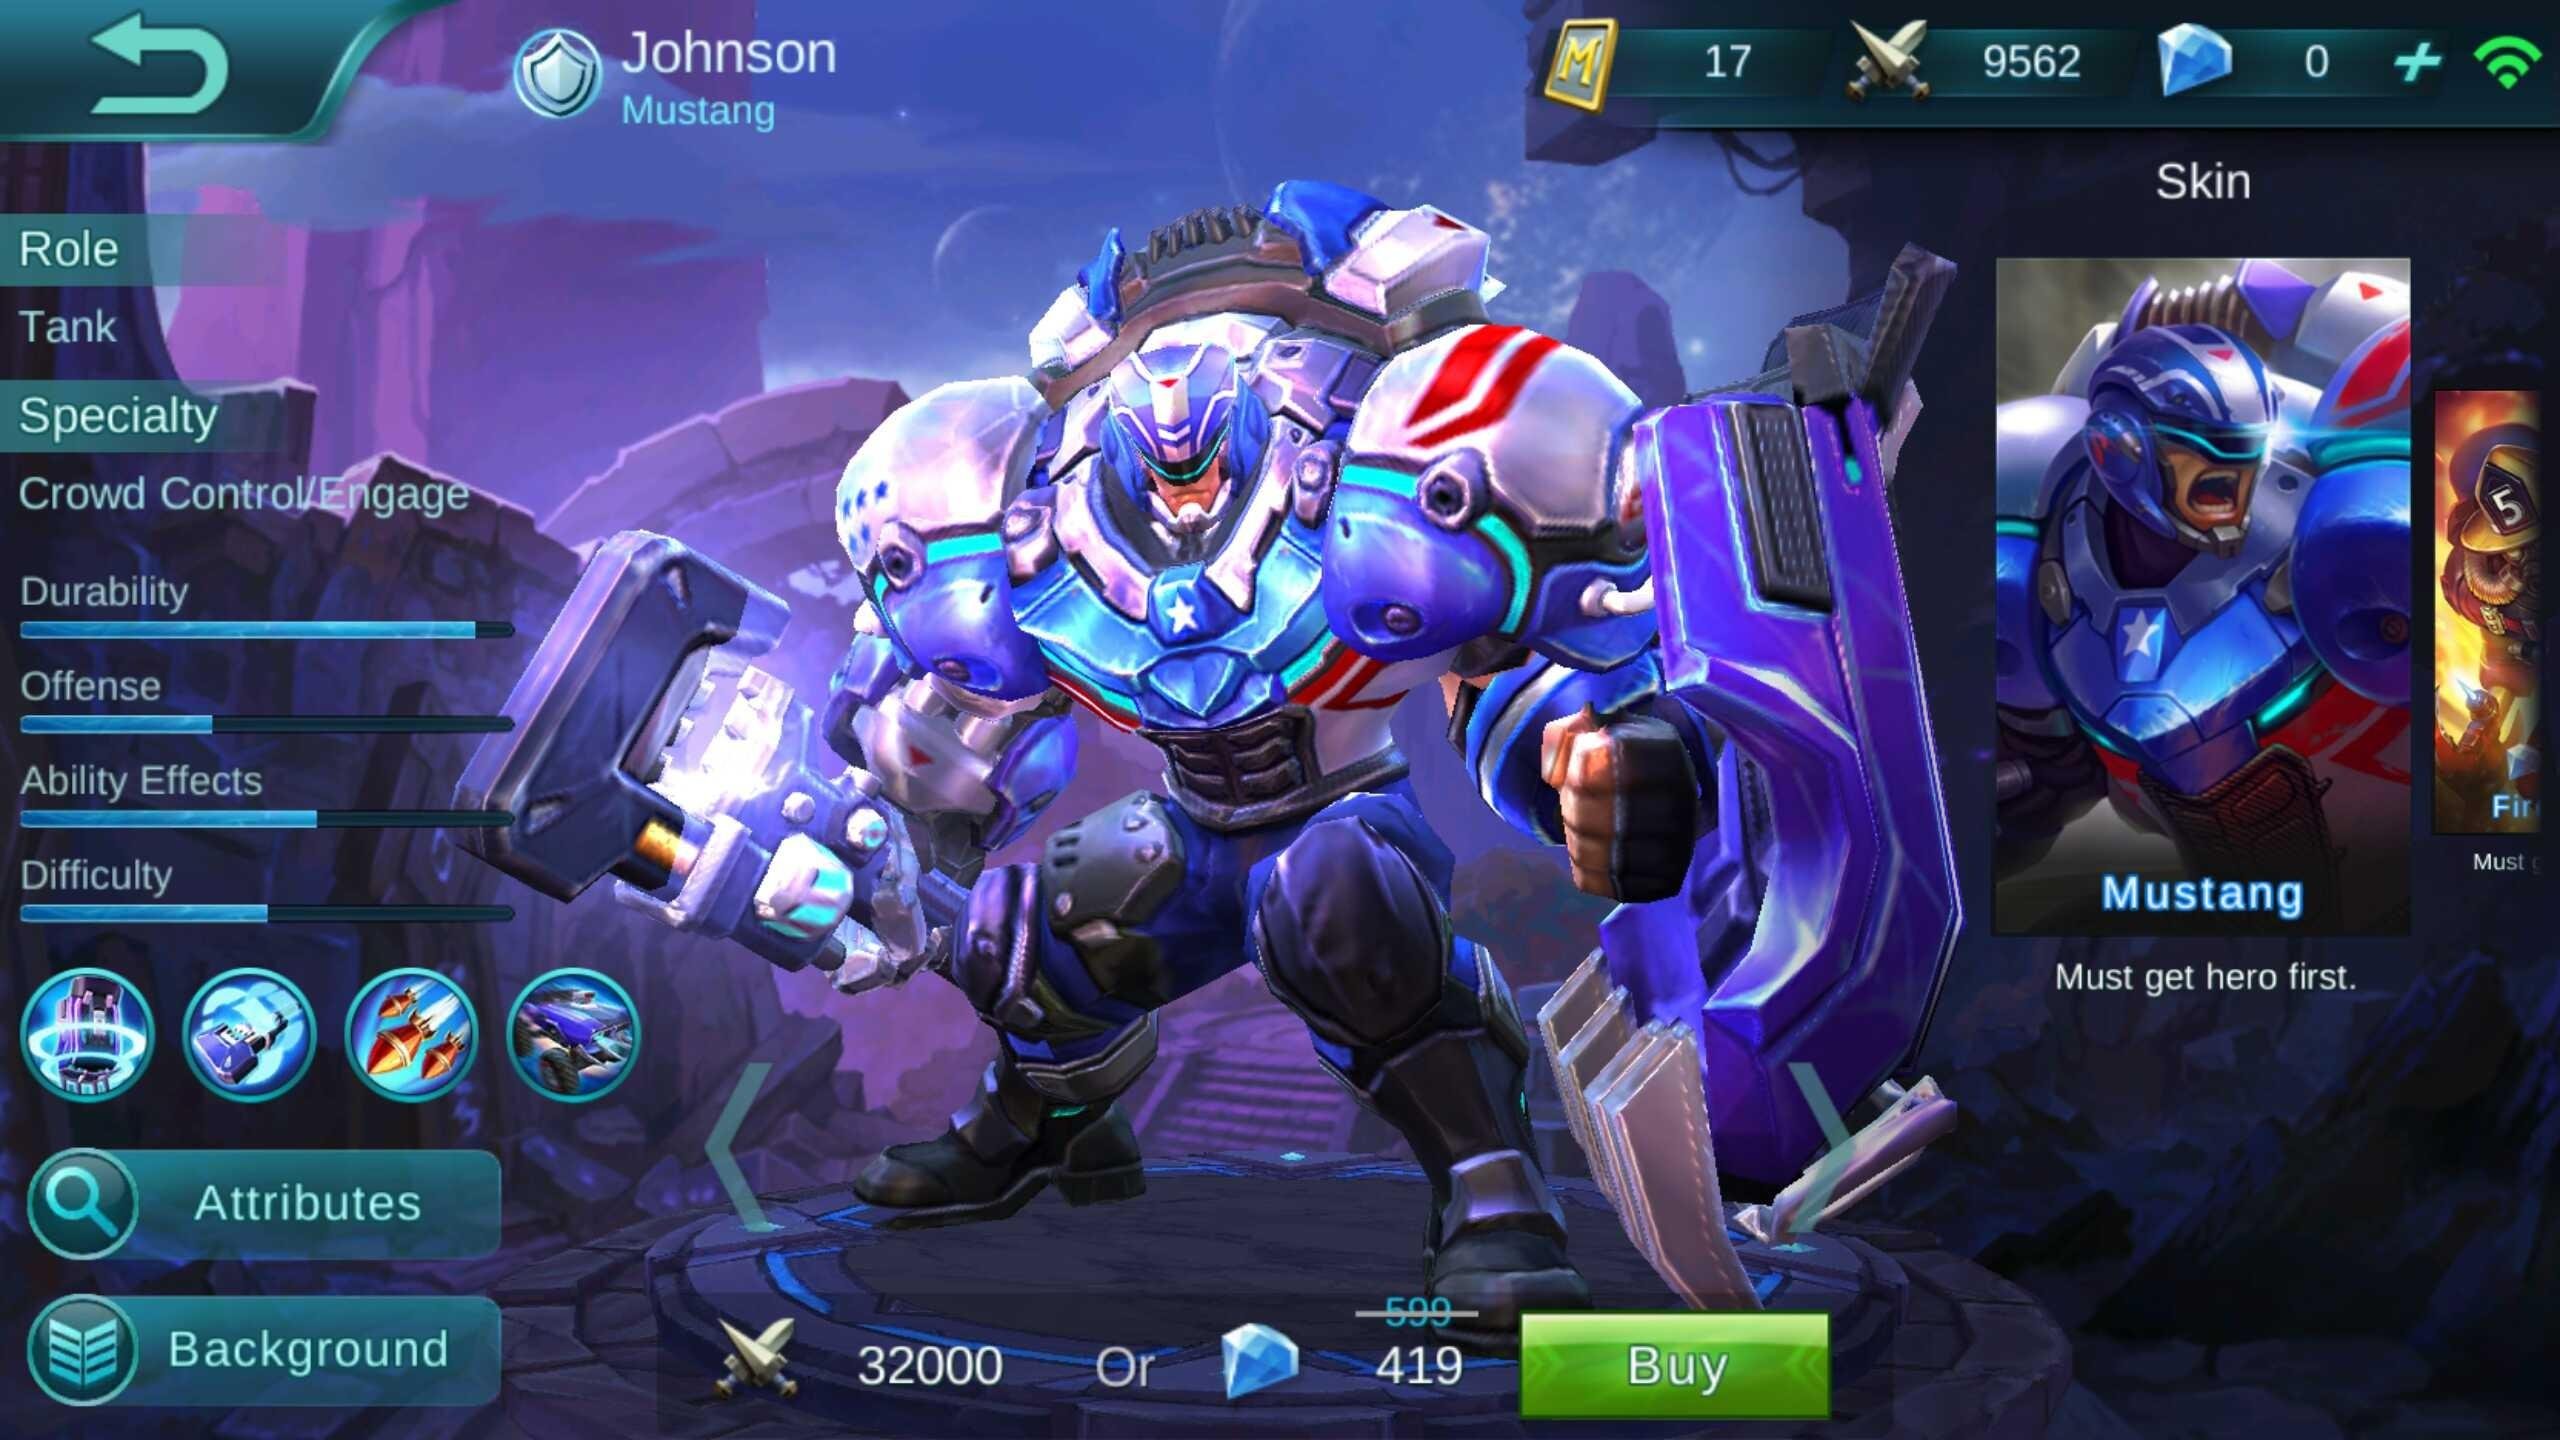 Wire Bone Muscles 5 Strongest Mobile Legends Hero Tanks That Make